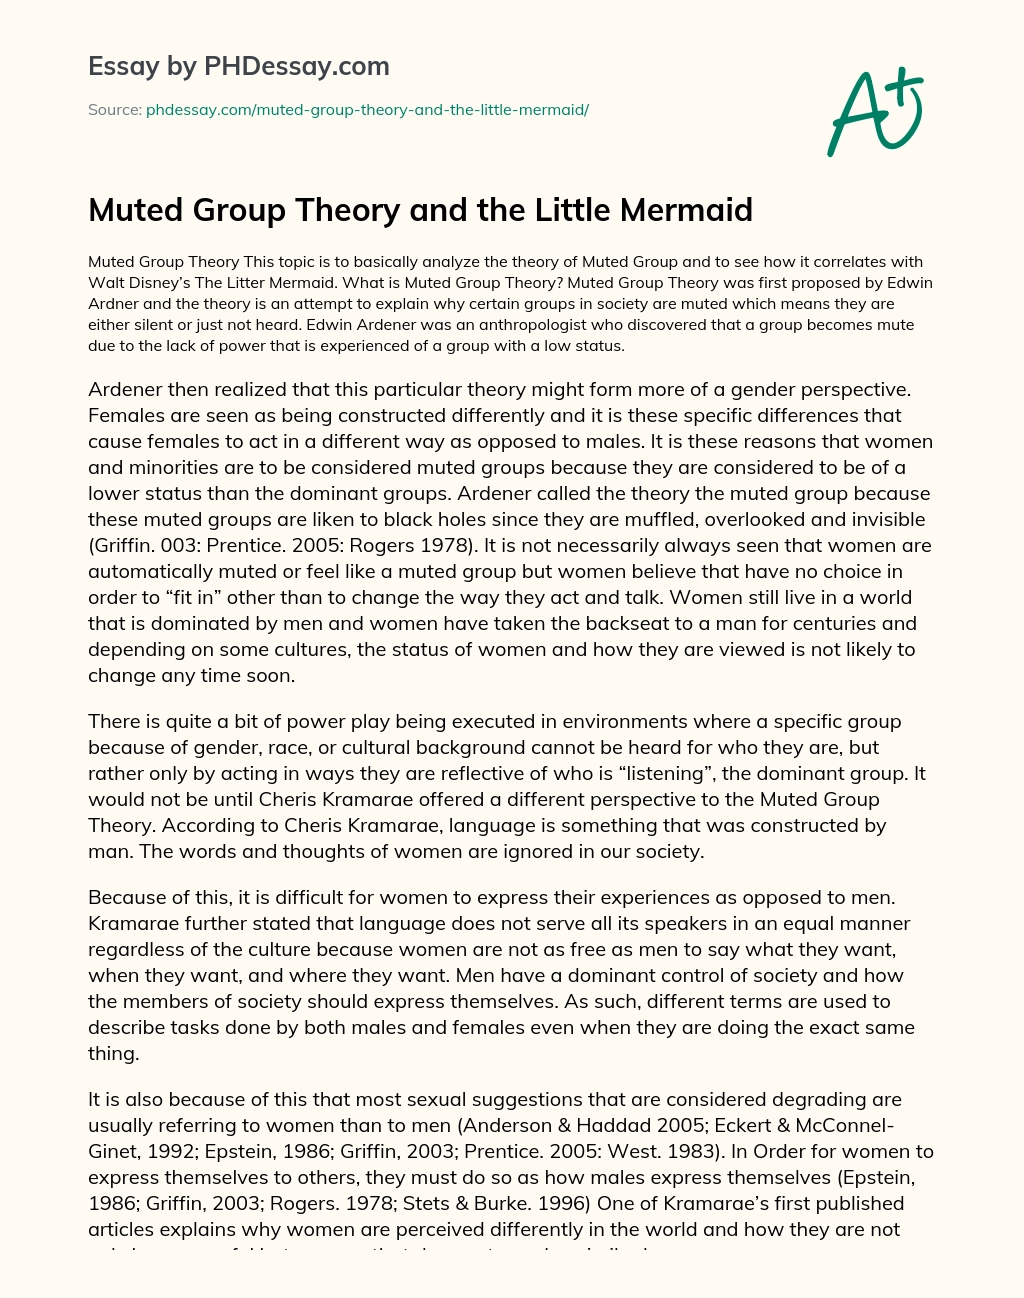 what is muted group theory